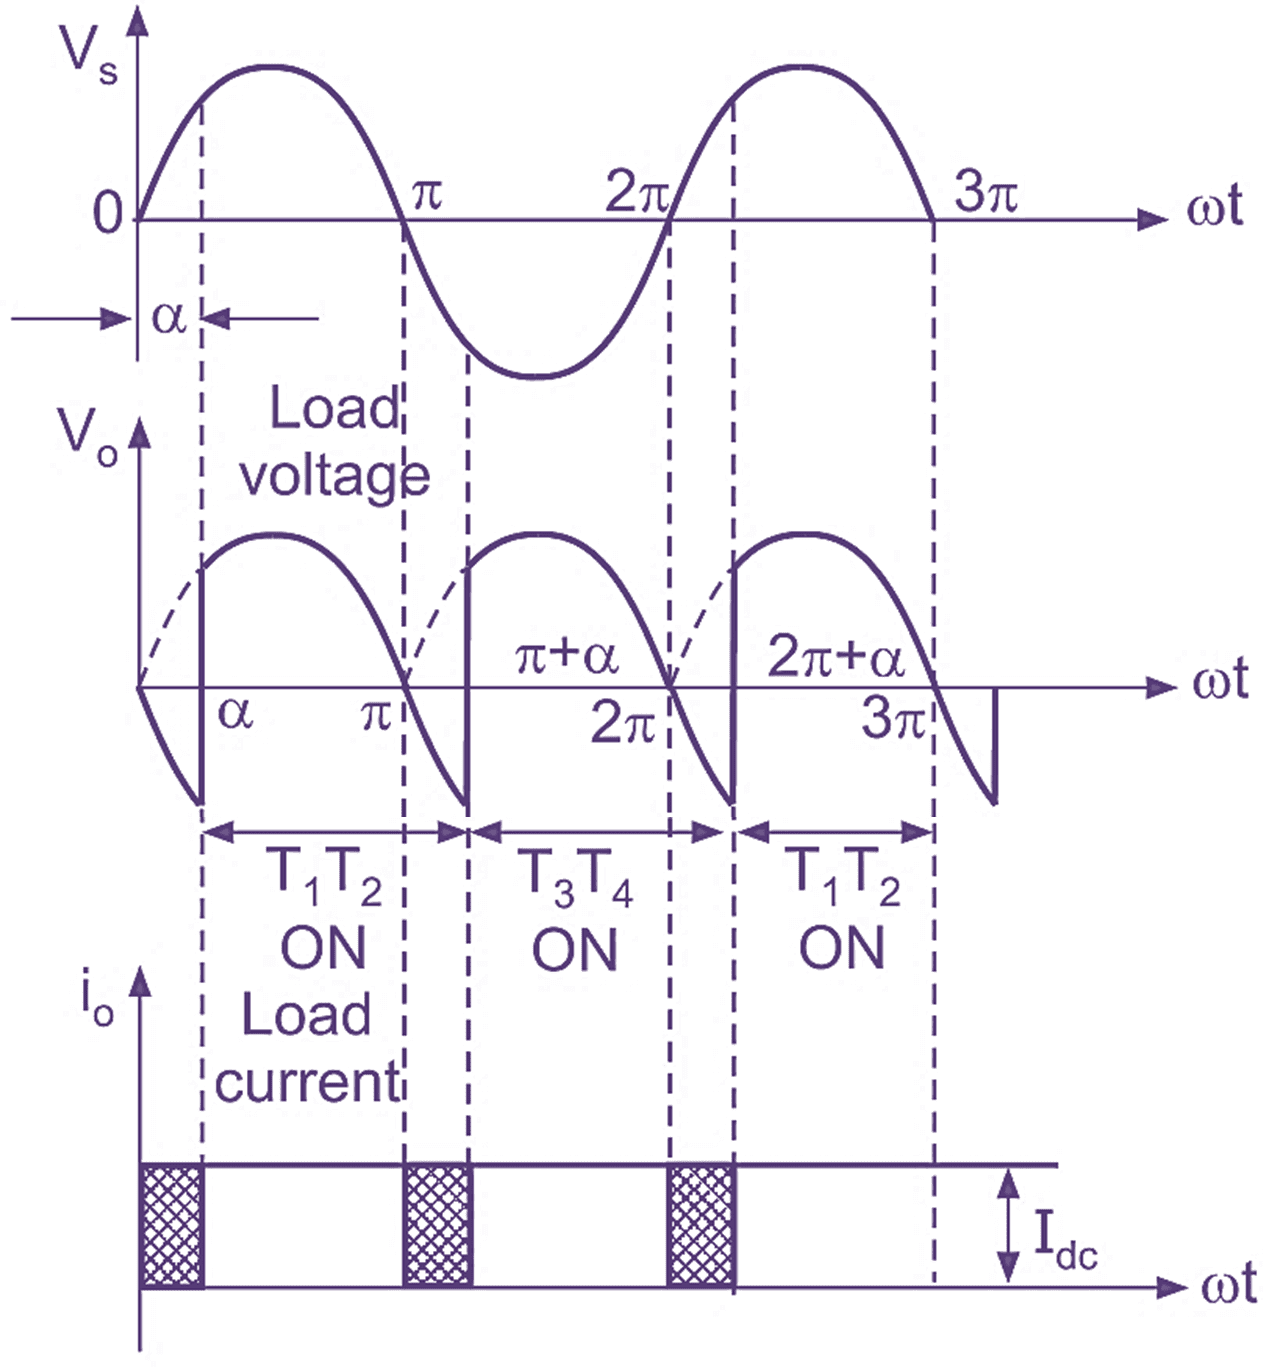 Single Phase Full Wave Controlled Rectifier with RL load waveforms